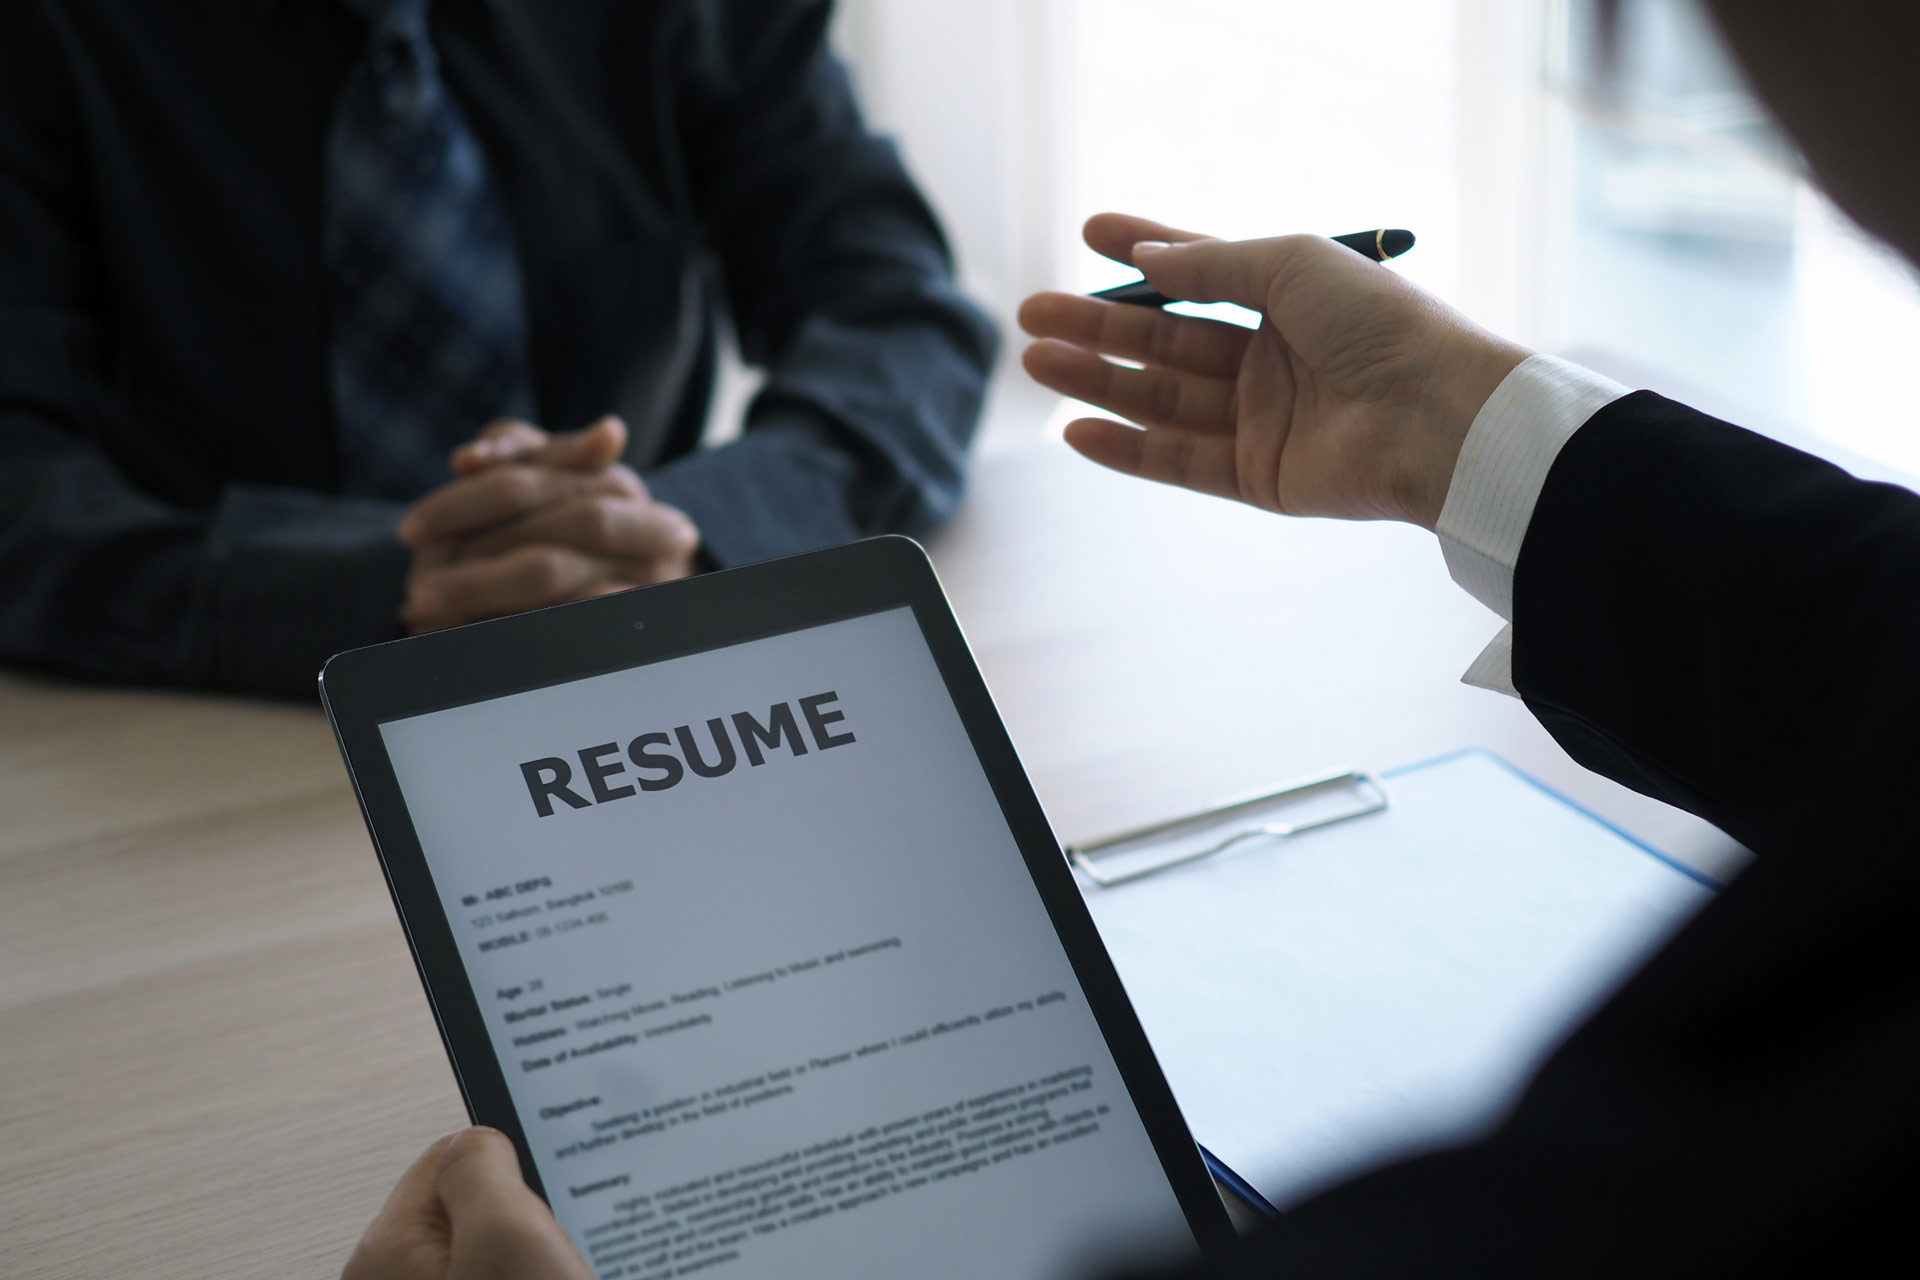 Resume screening and Recruitment services